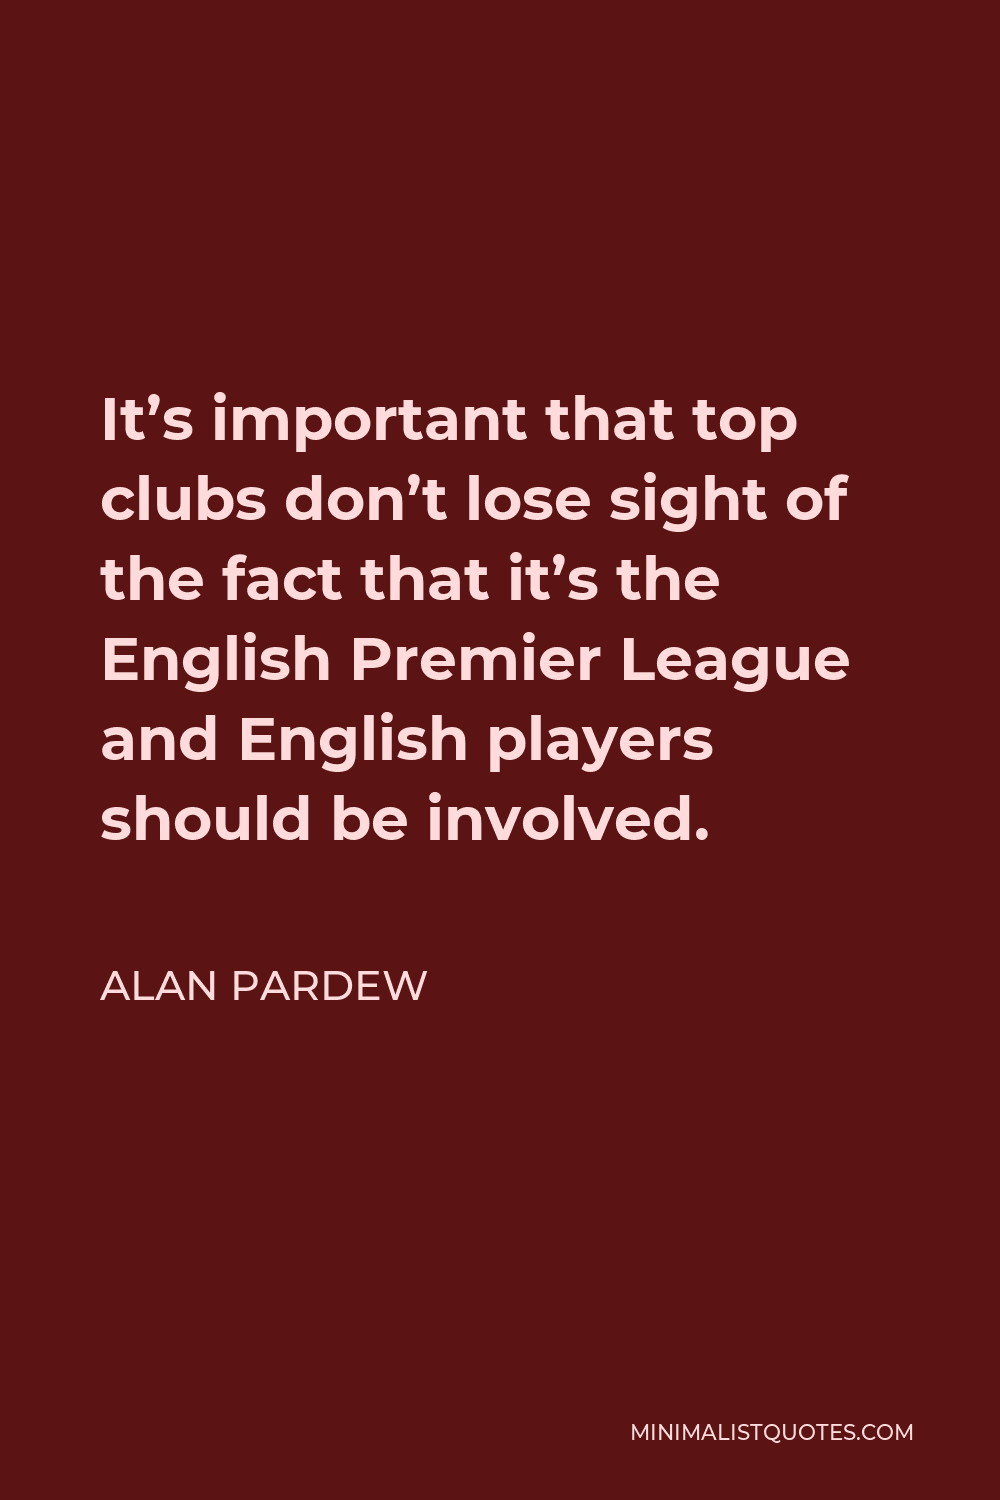 Alan Pardew Quote - It’s important that top clubs don’t lose sight of the fact that it’s the English Premier League and English players should be involved.